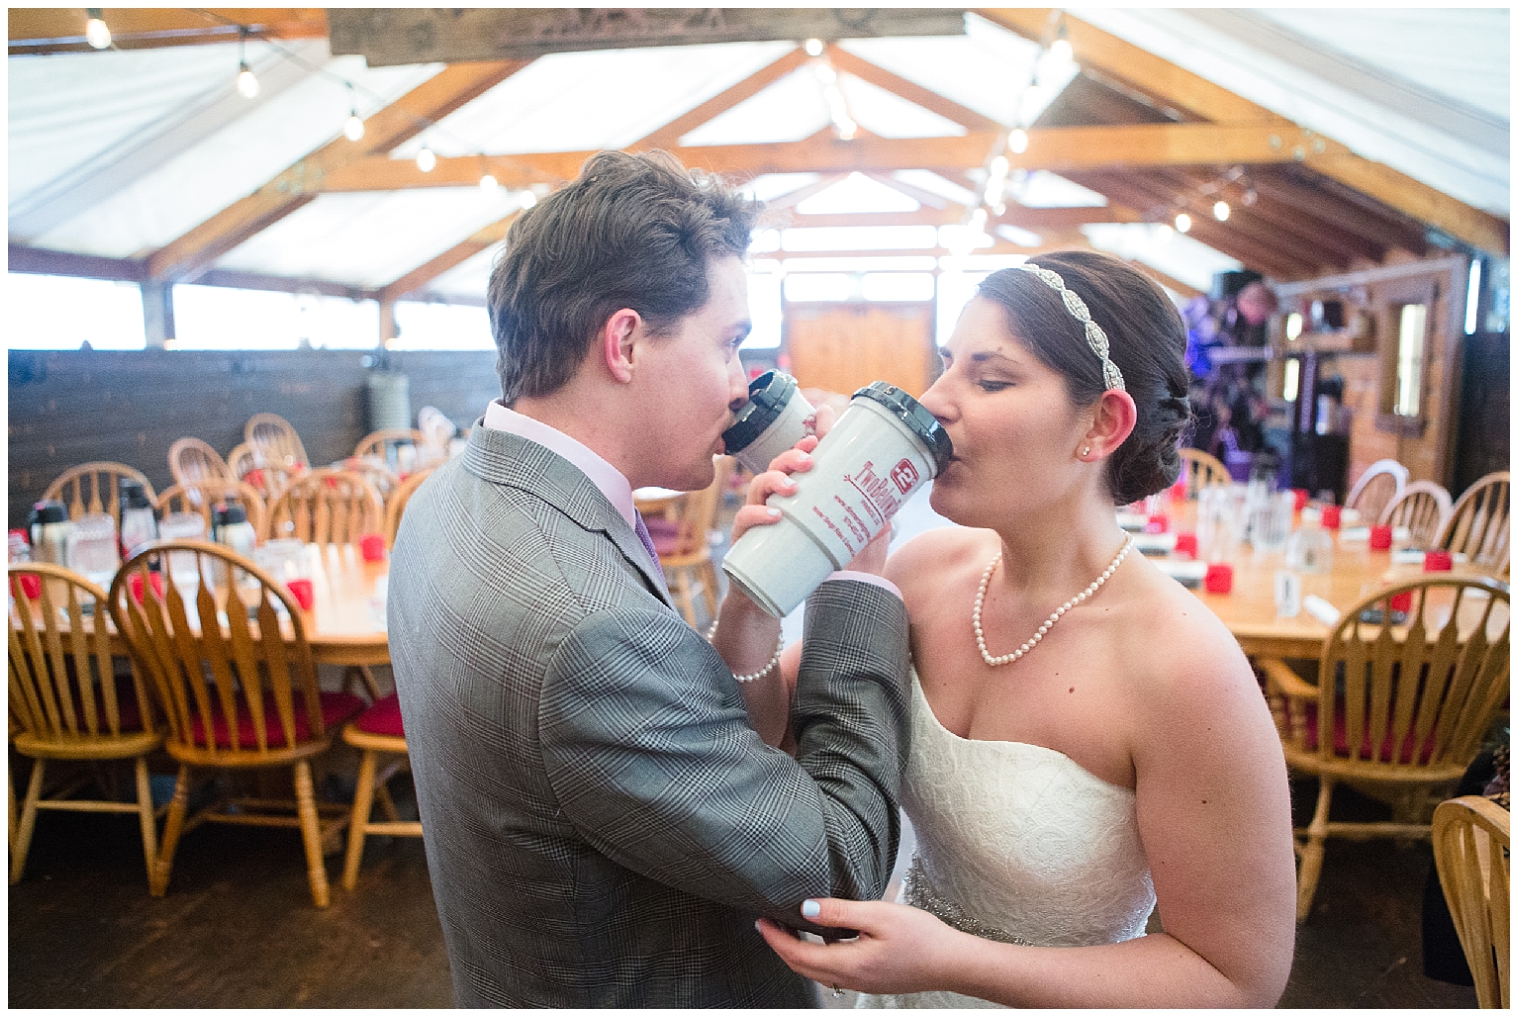 The wedding couple share hot drinks with intertwined arms at their Colorado mountain elopement.